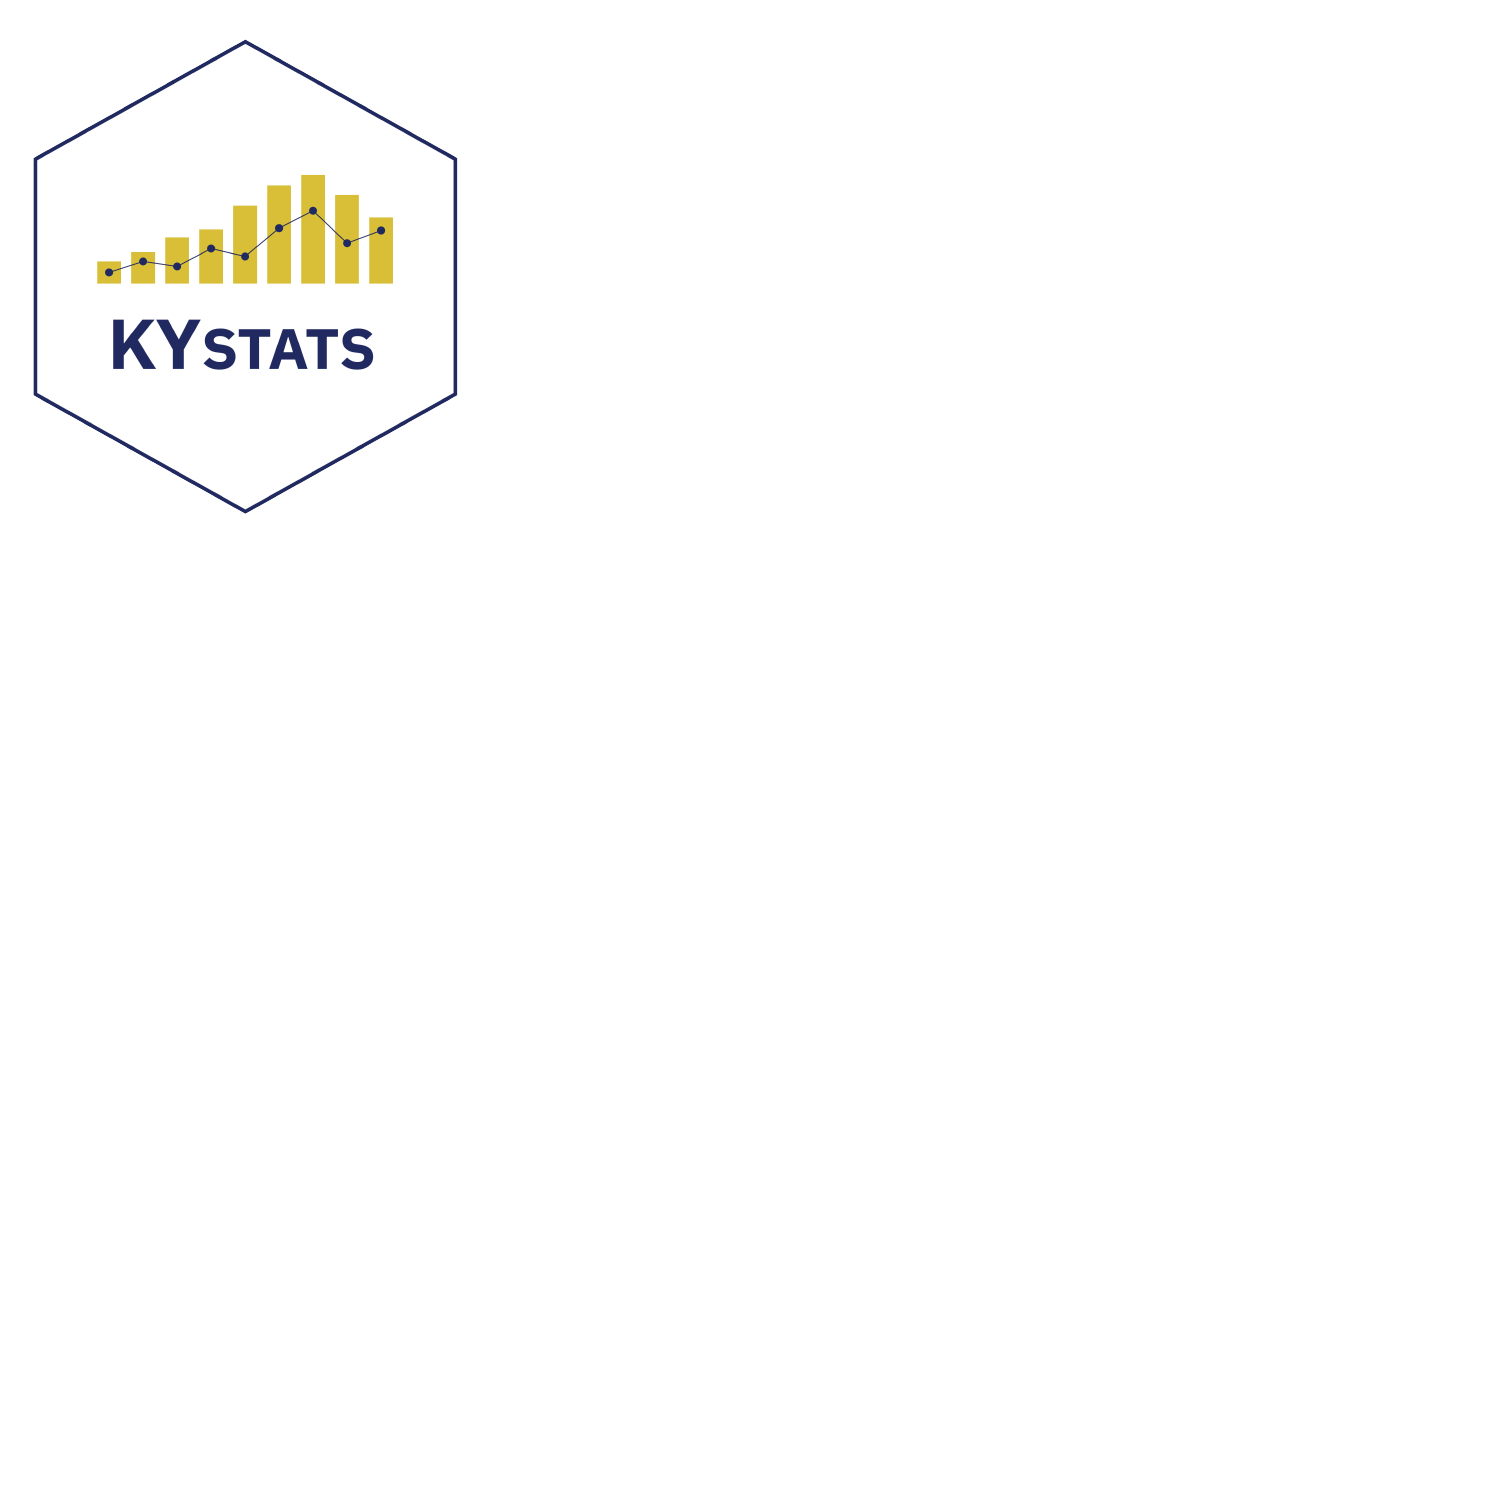 Family Resource Simulator An interactive tool illustrating work supports and cliff effects - Home Image